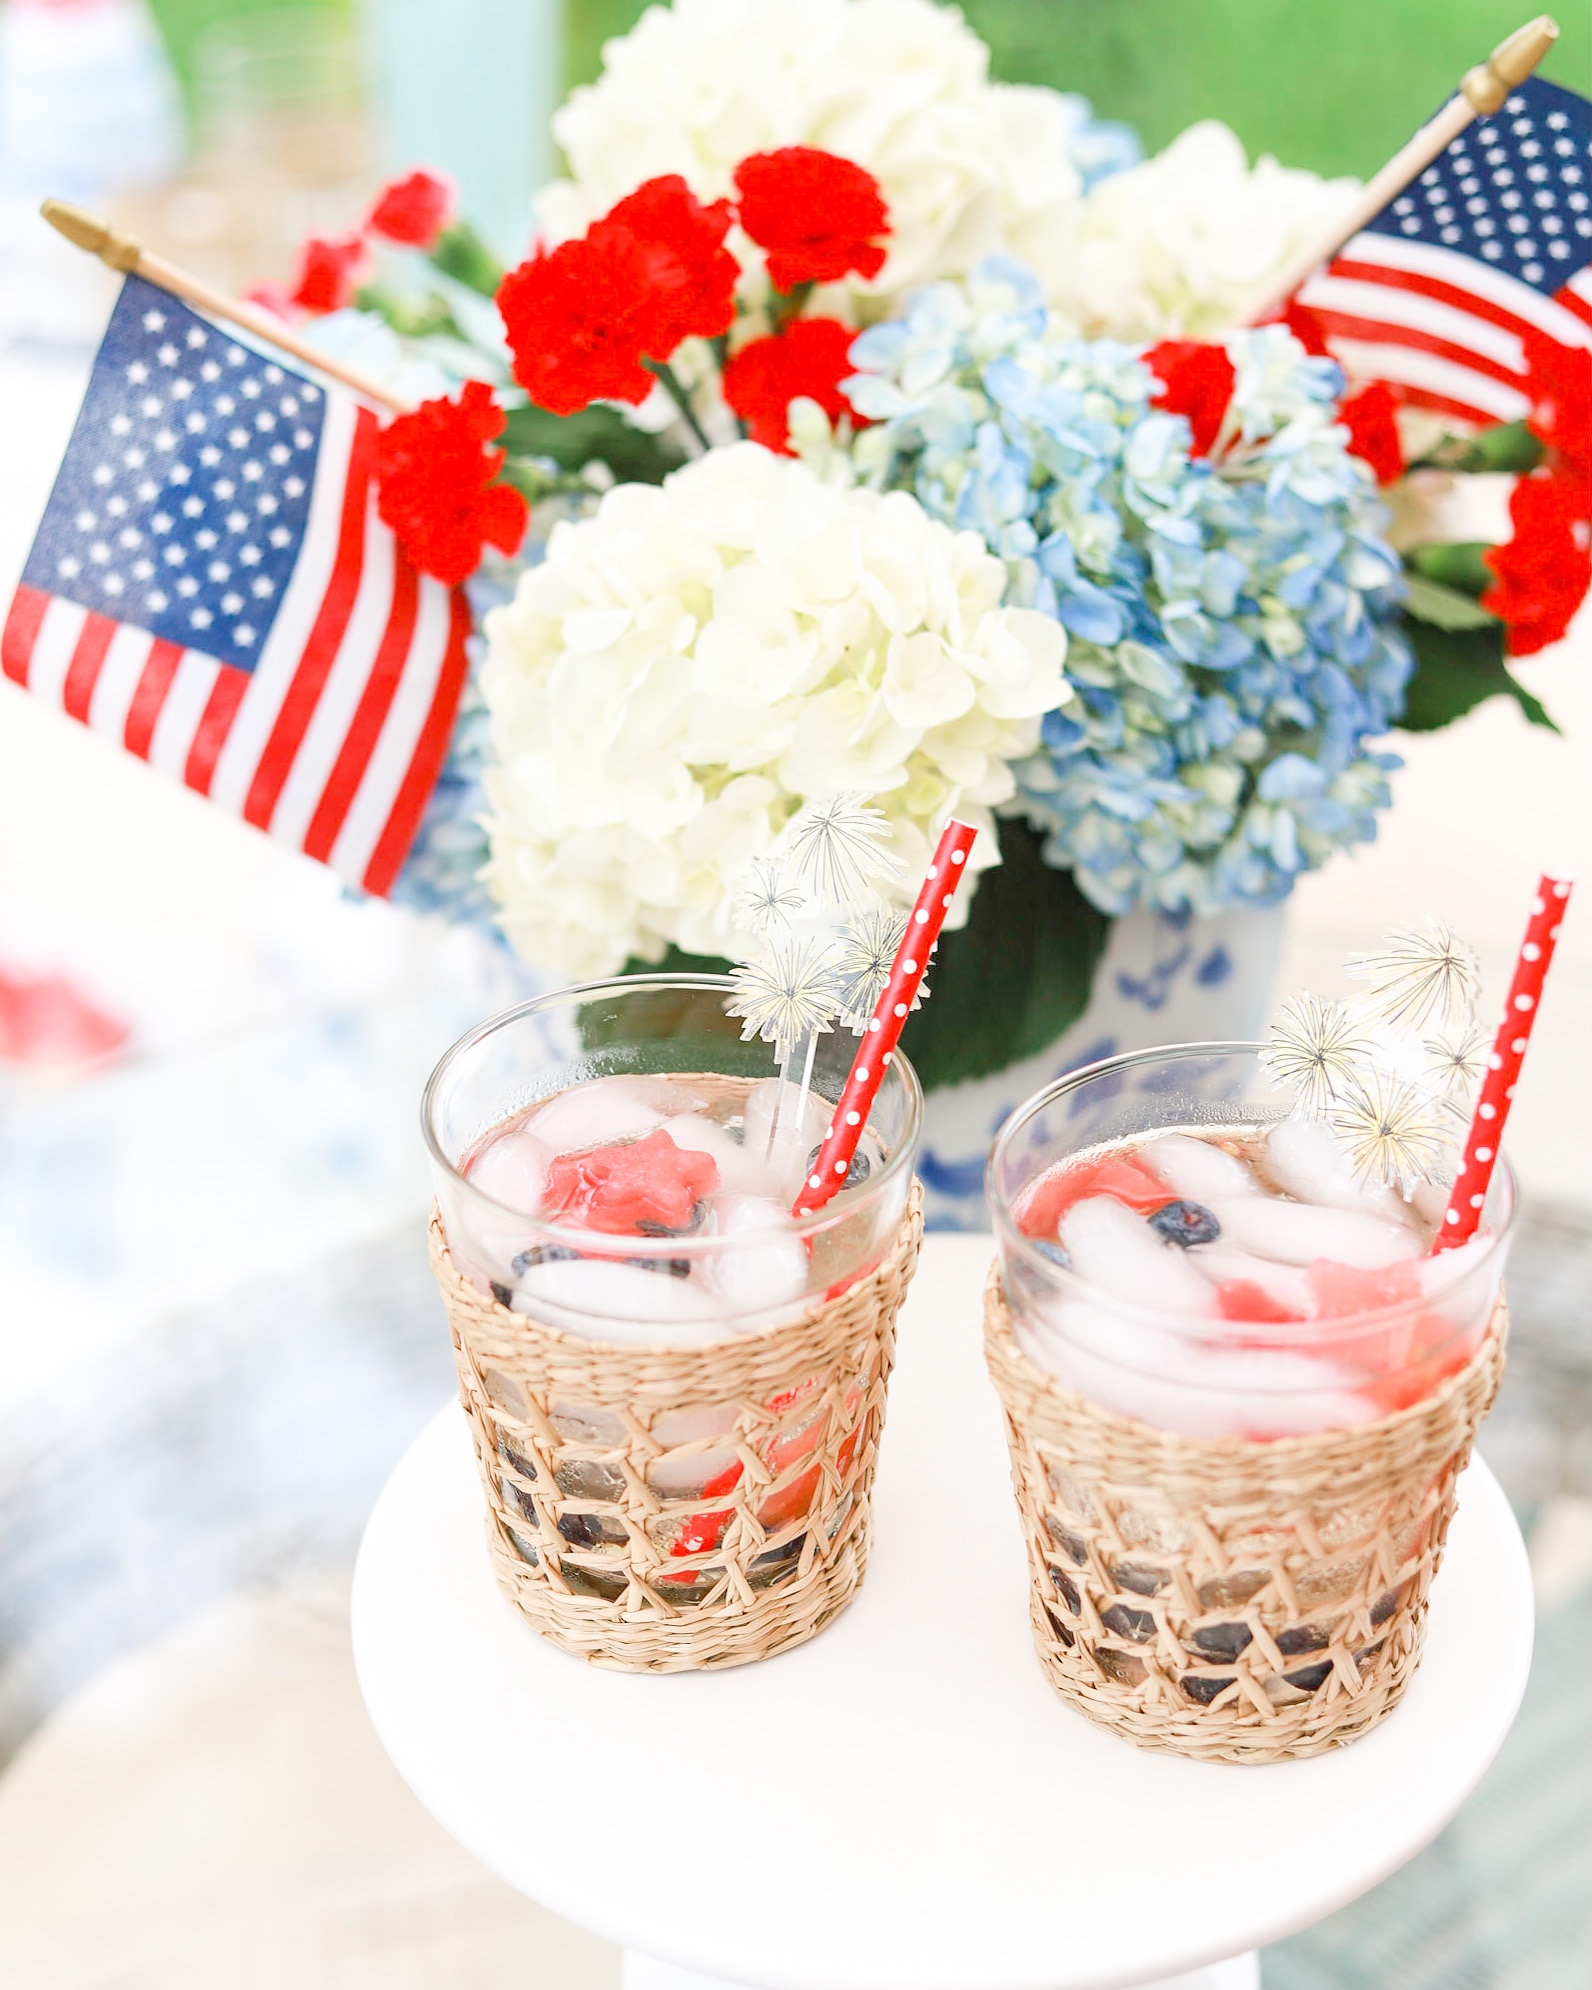 RED, WHITE, AND BLUE WINE SPRITZER